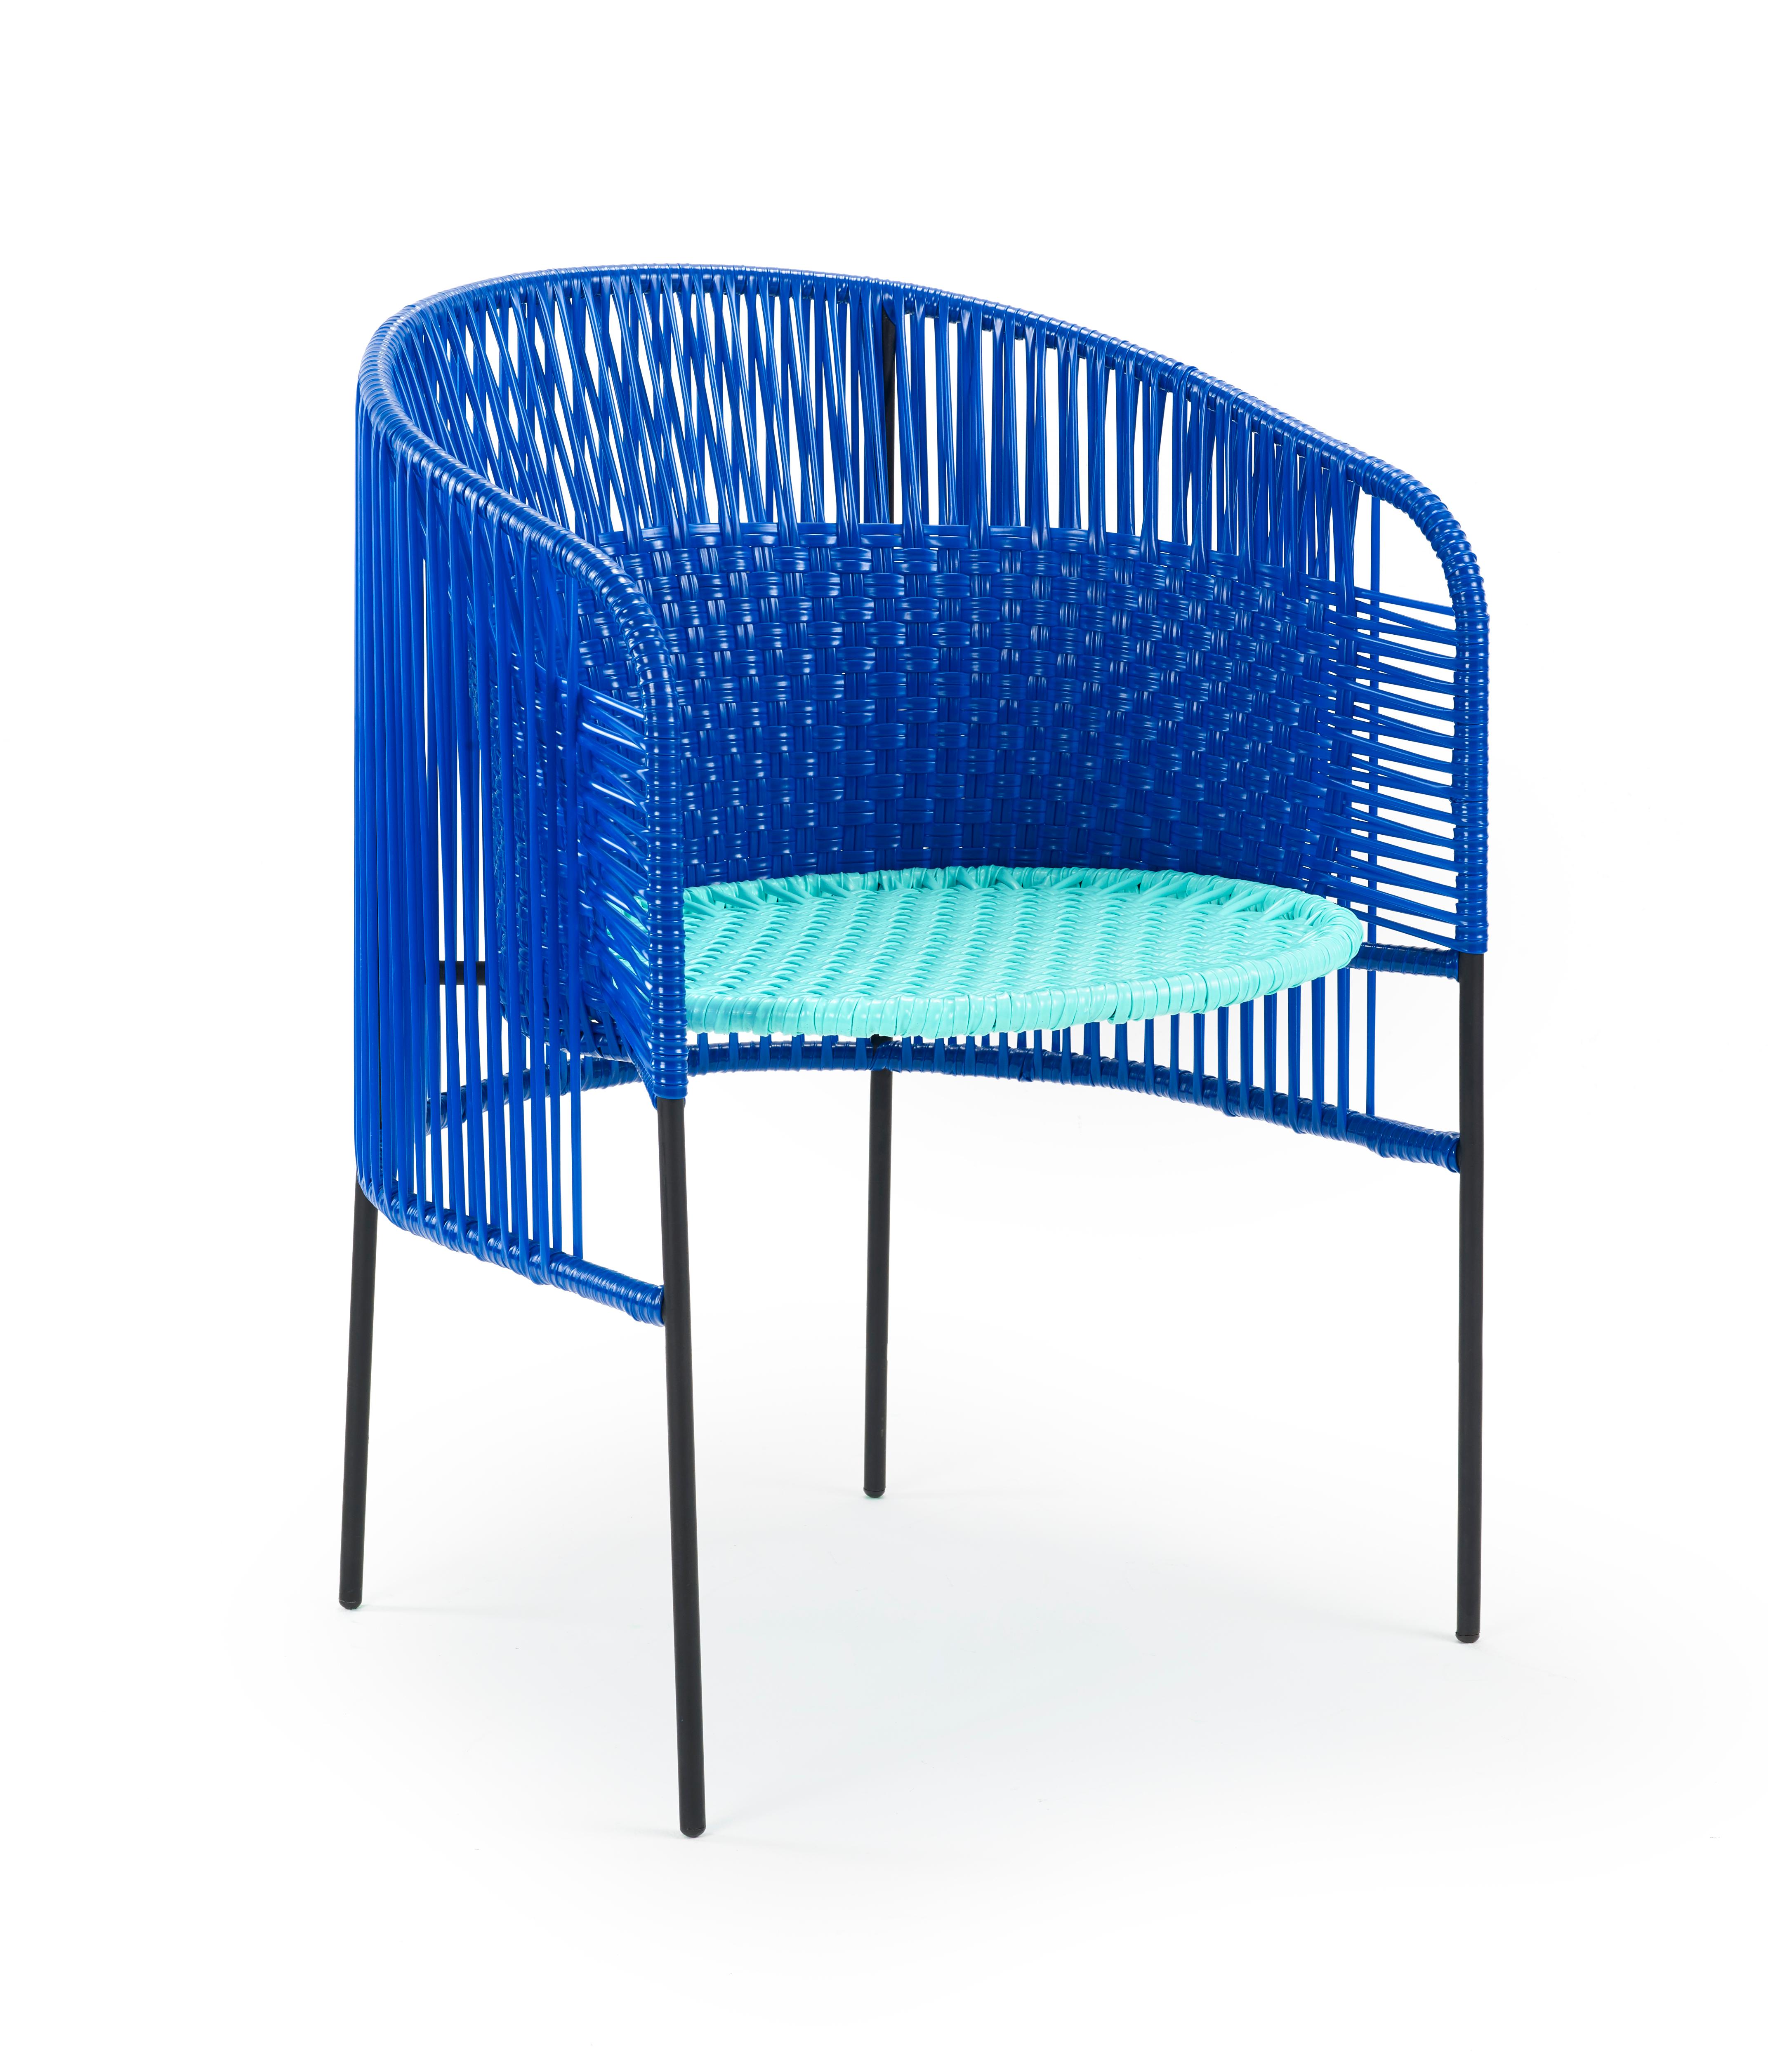 Blue caribe dining chair by Sebastian Herkner
Materials: Galvanized and powder-coated tubular steel. PVC strings are made from recycled plastic.
Technique: Made from recycled plastic and weaved by local craftspeople in Colombia. 
Dimensions: W